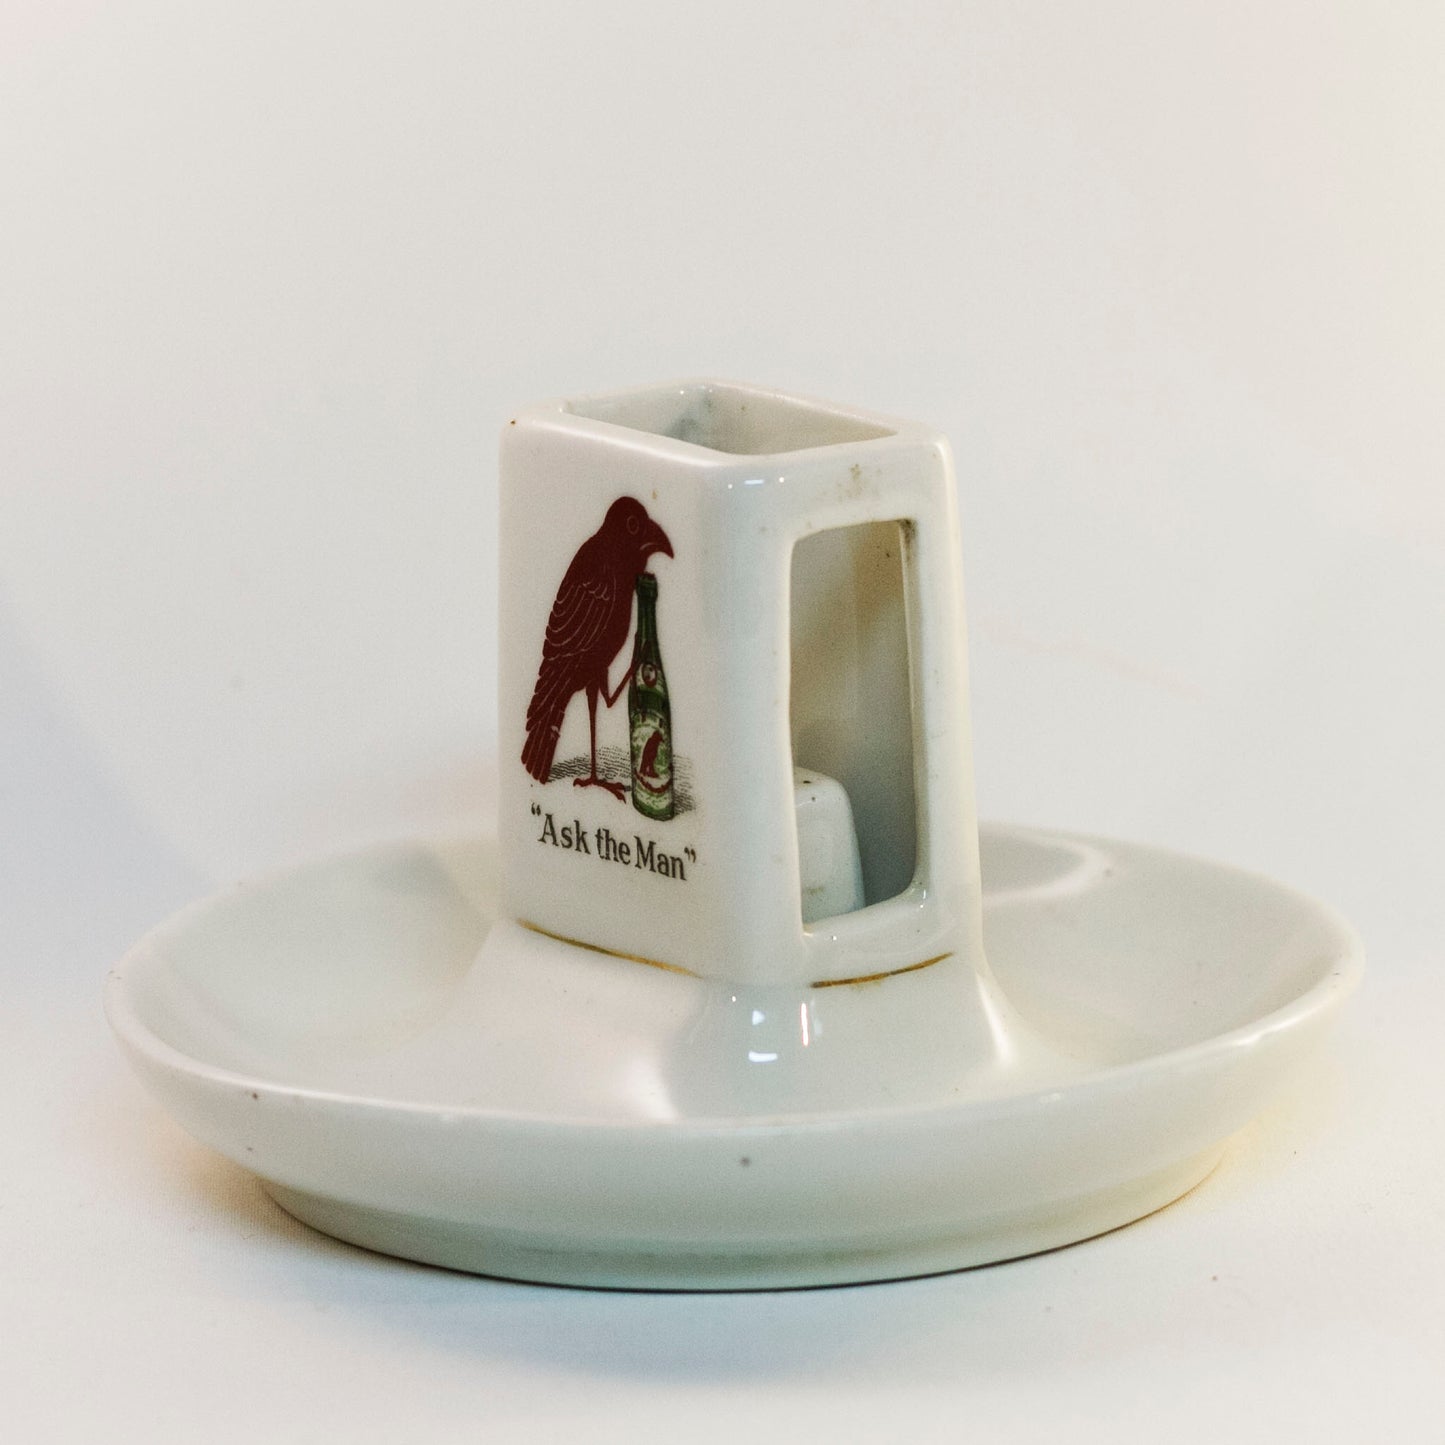 RED RAVEN SPLITS "ASK THE MAN" Porcelain Advertising Double- Logo Match Holder Circa Early 1900s